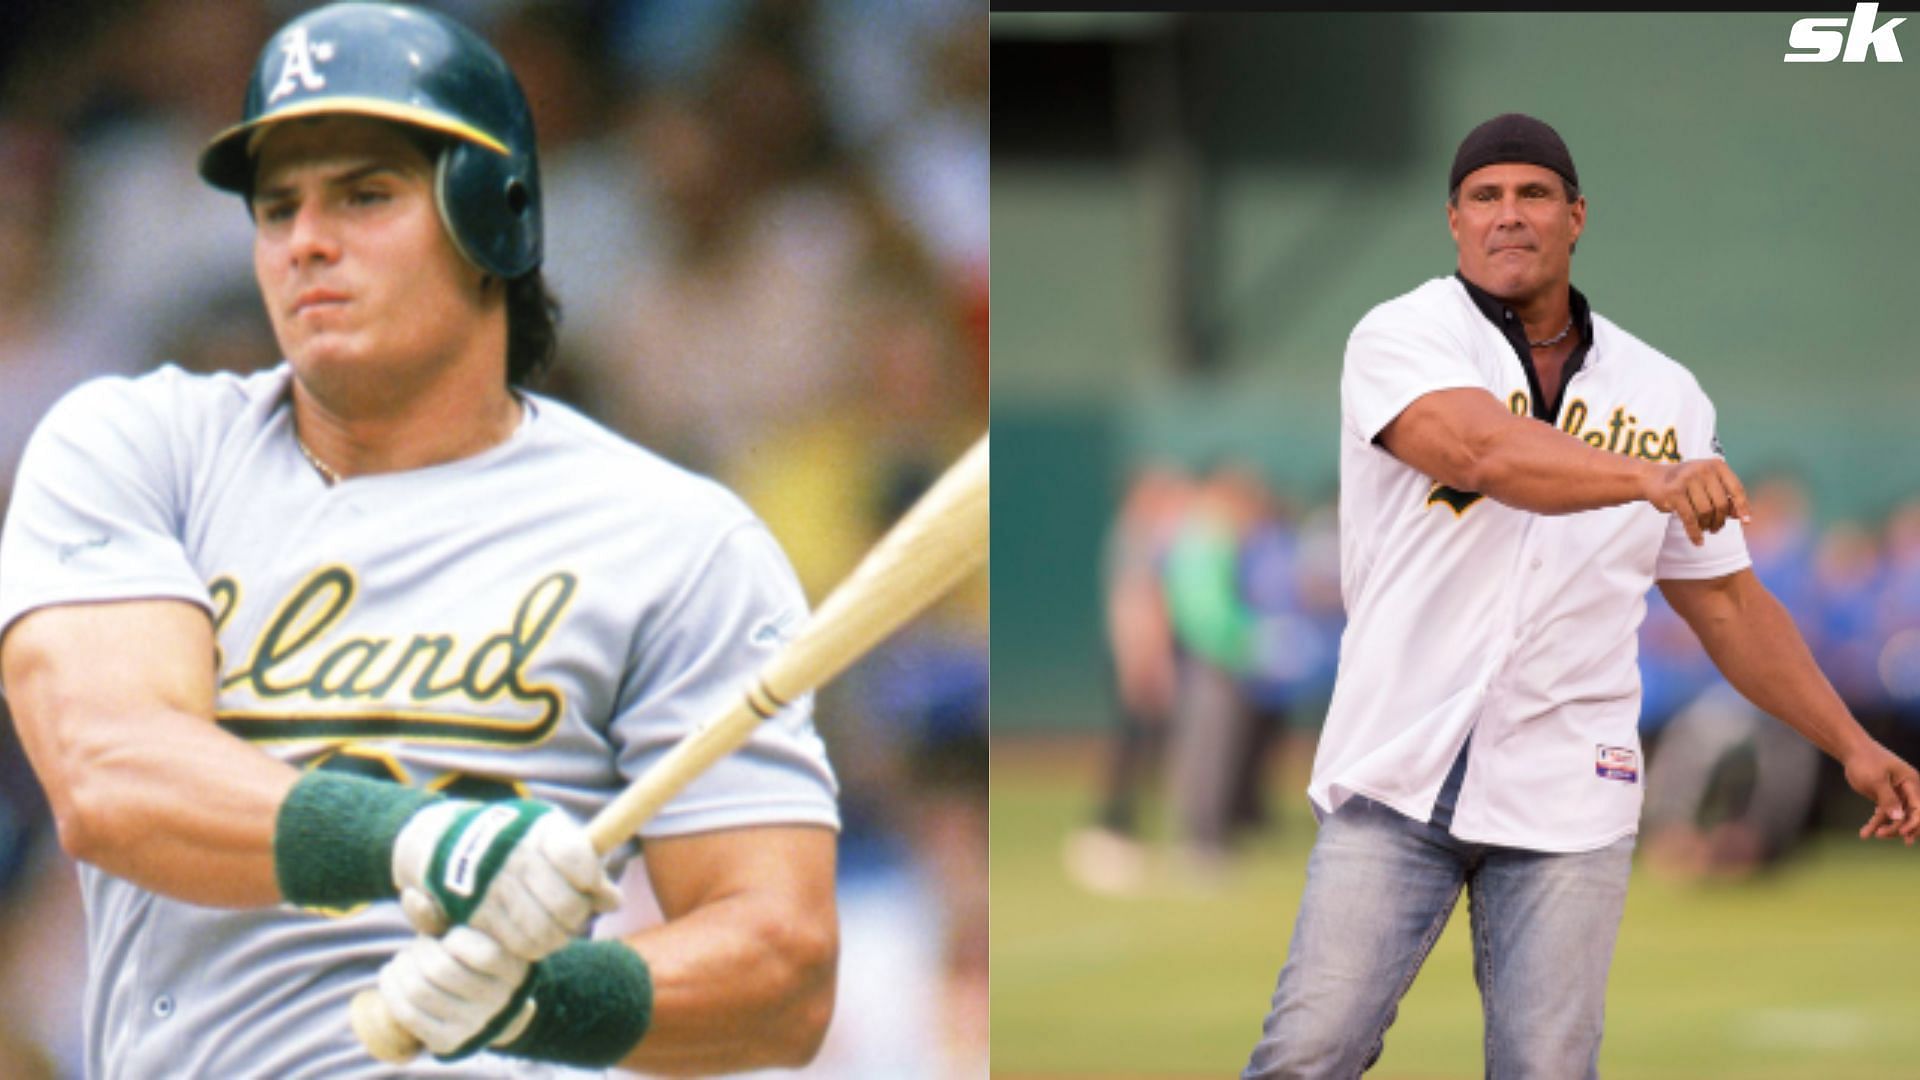 Jose Canseco, former MLB player